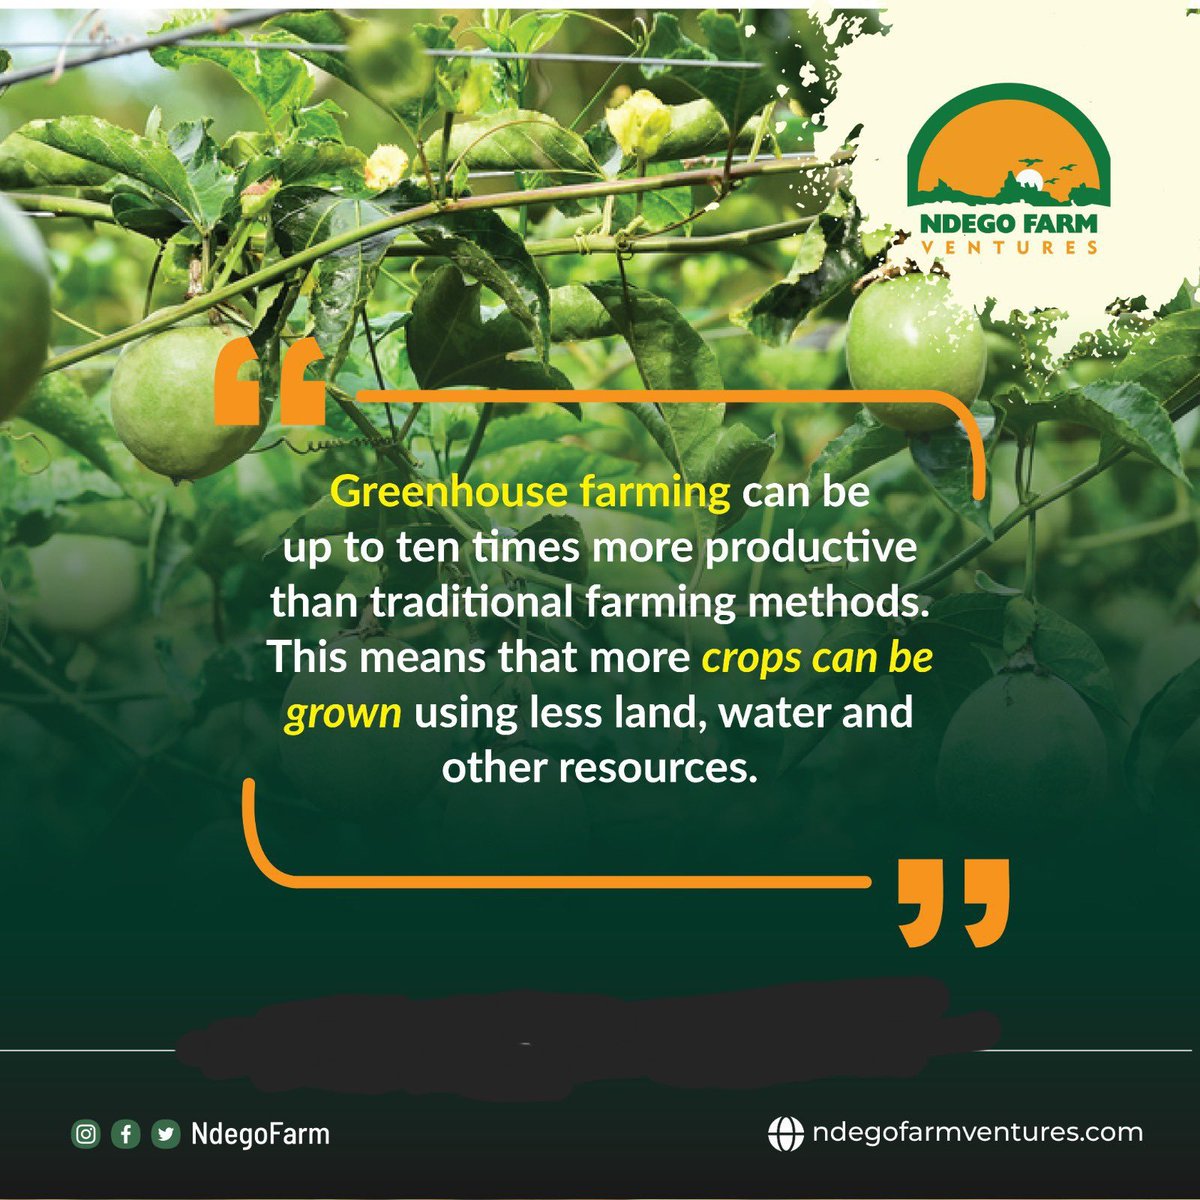 Studies suggest that profits per crop per sqm can be increased when executing #greenhousefarming instead of open-field agriculture. By utilizing resources more efficiently, you create less waste, which can translate into bigger profits. #RwOT #sustainableagriculture #agribusiness